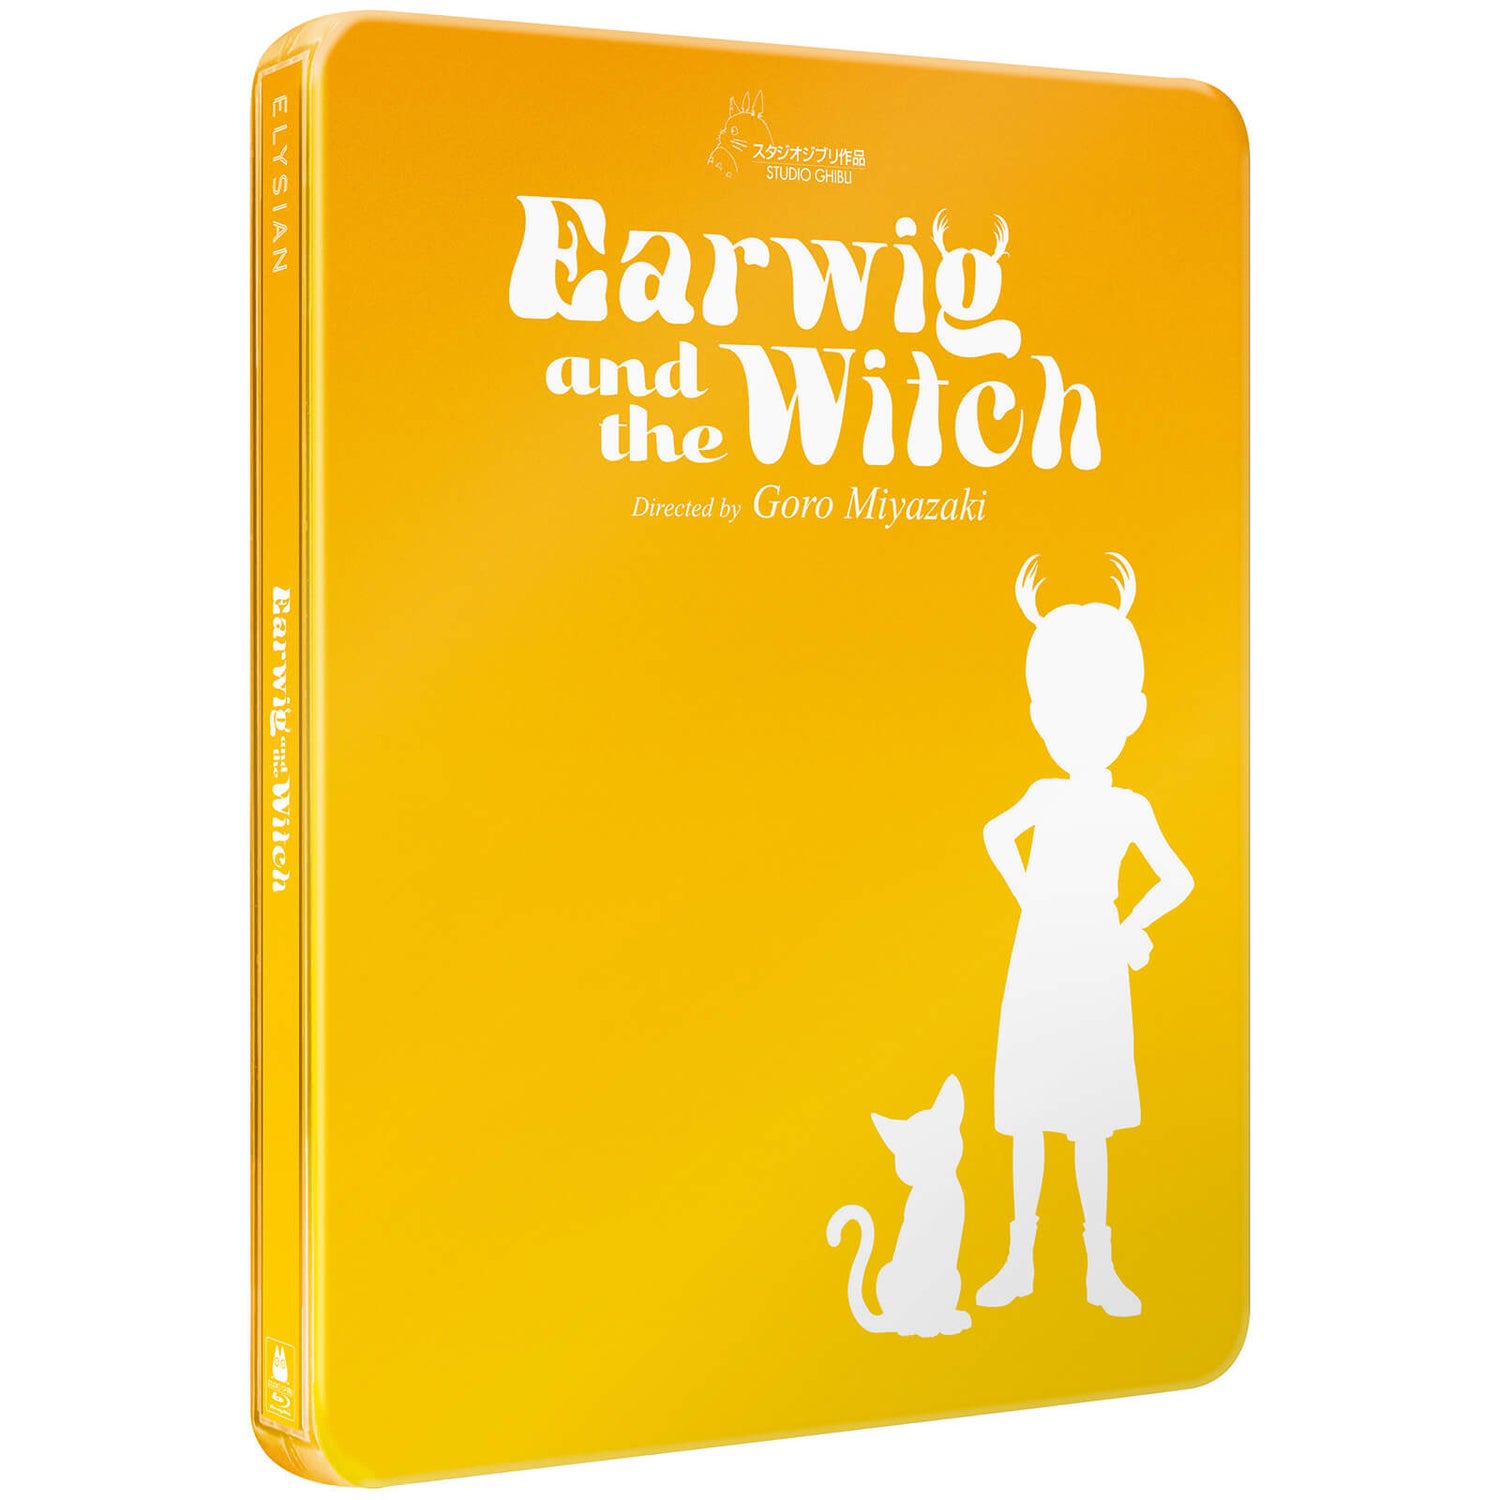 Earwig and the witch